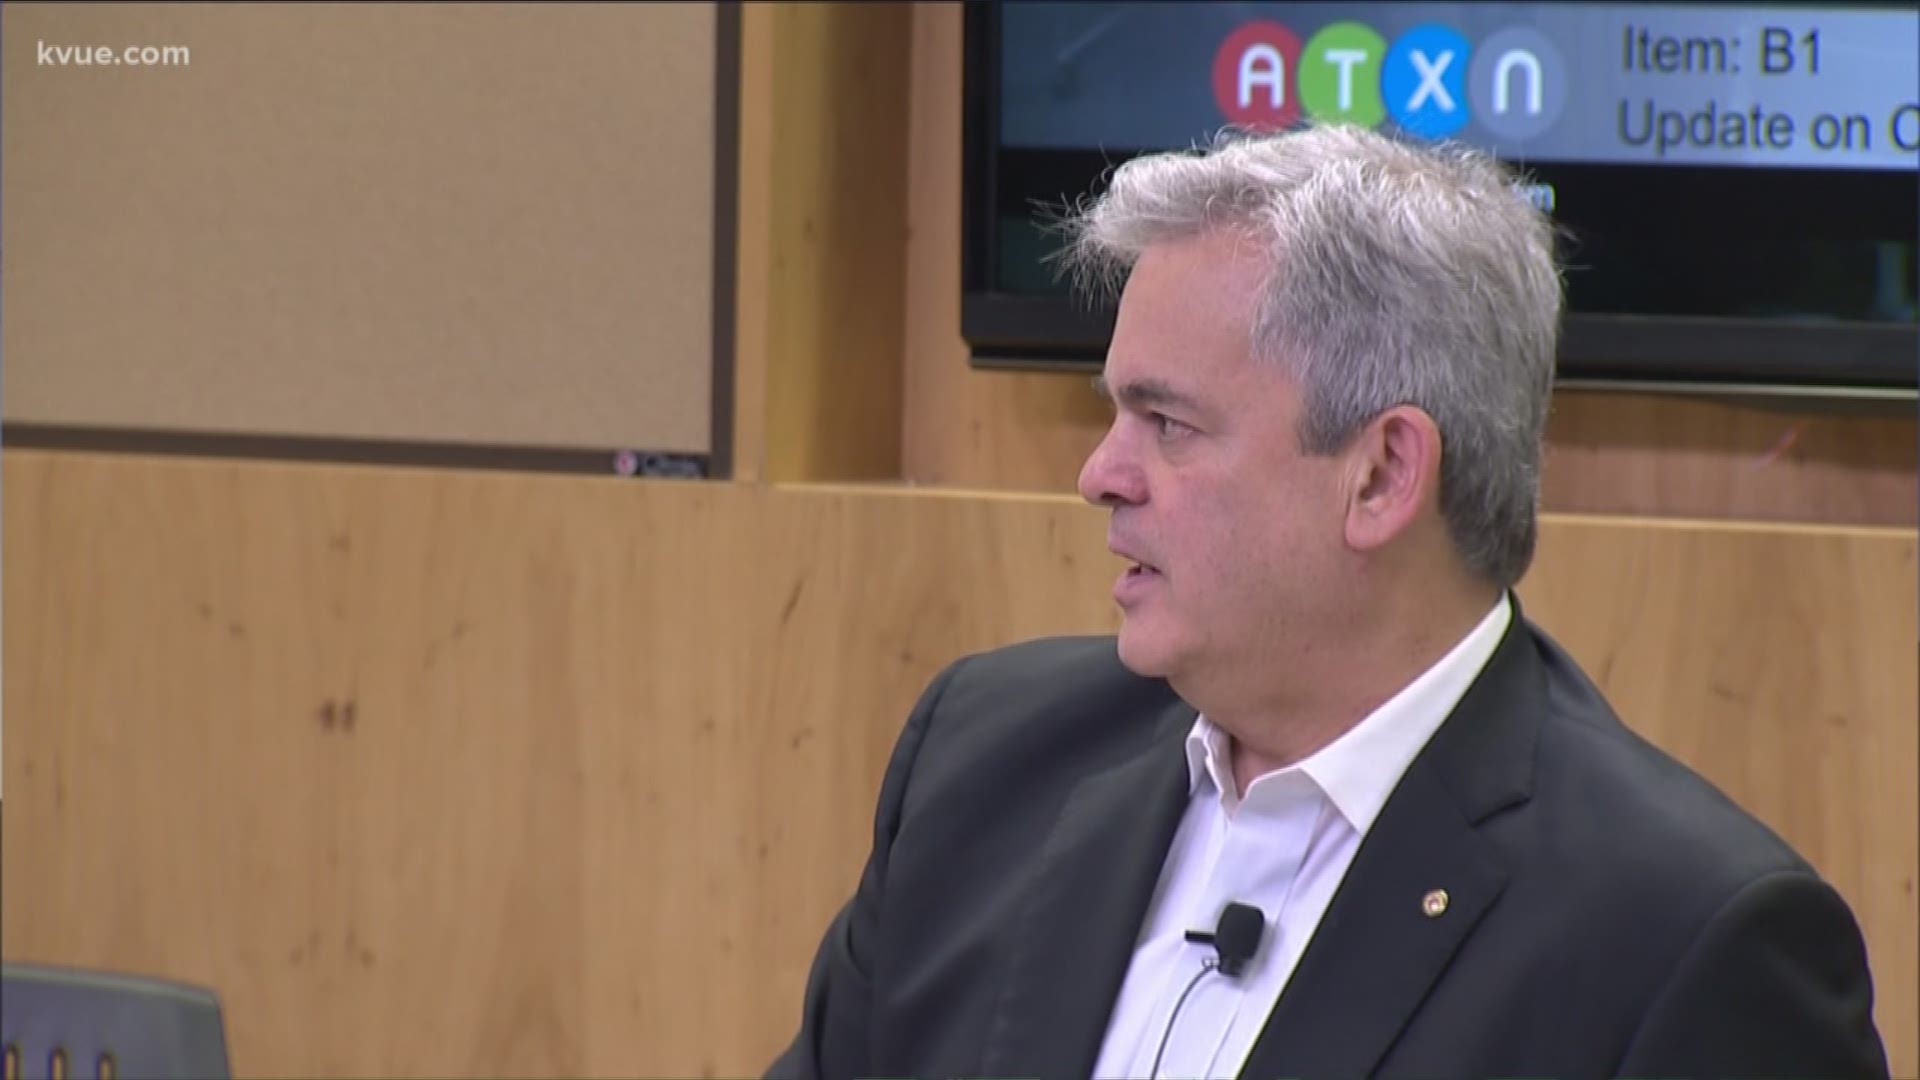 Mayor Steve Adler asked Austin Public Health to provide clarification about the City's decision to cancel the festival.